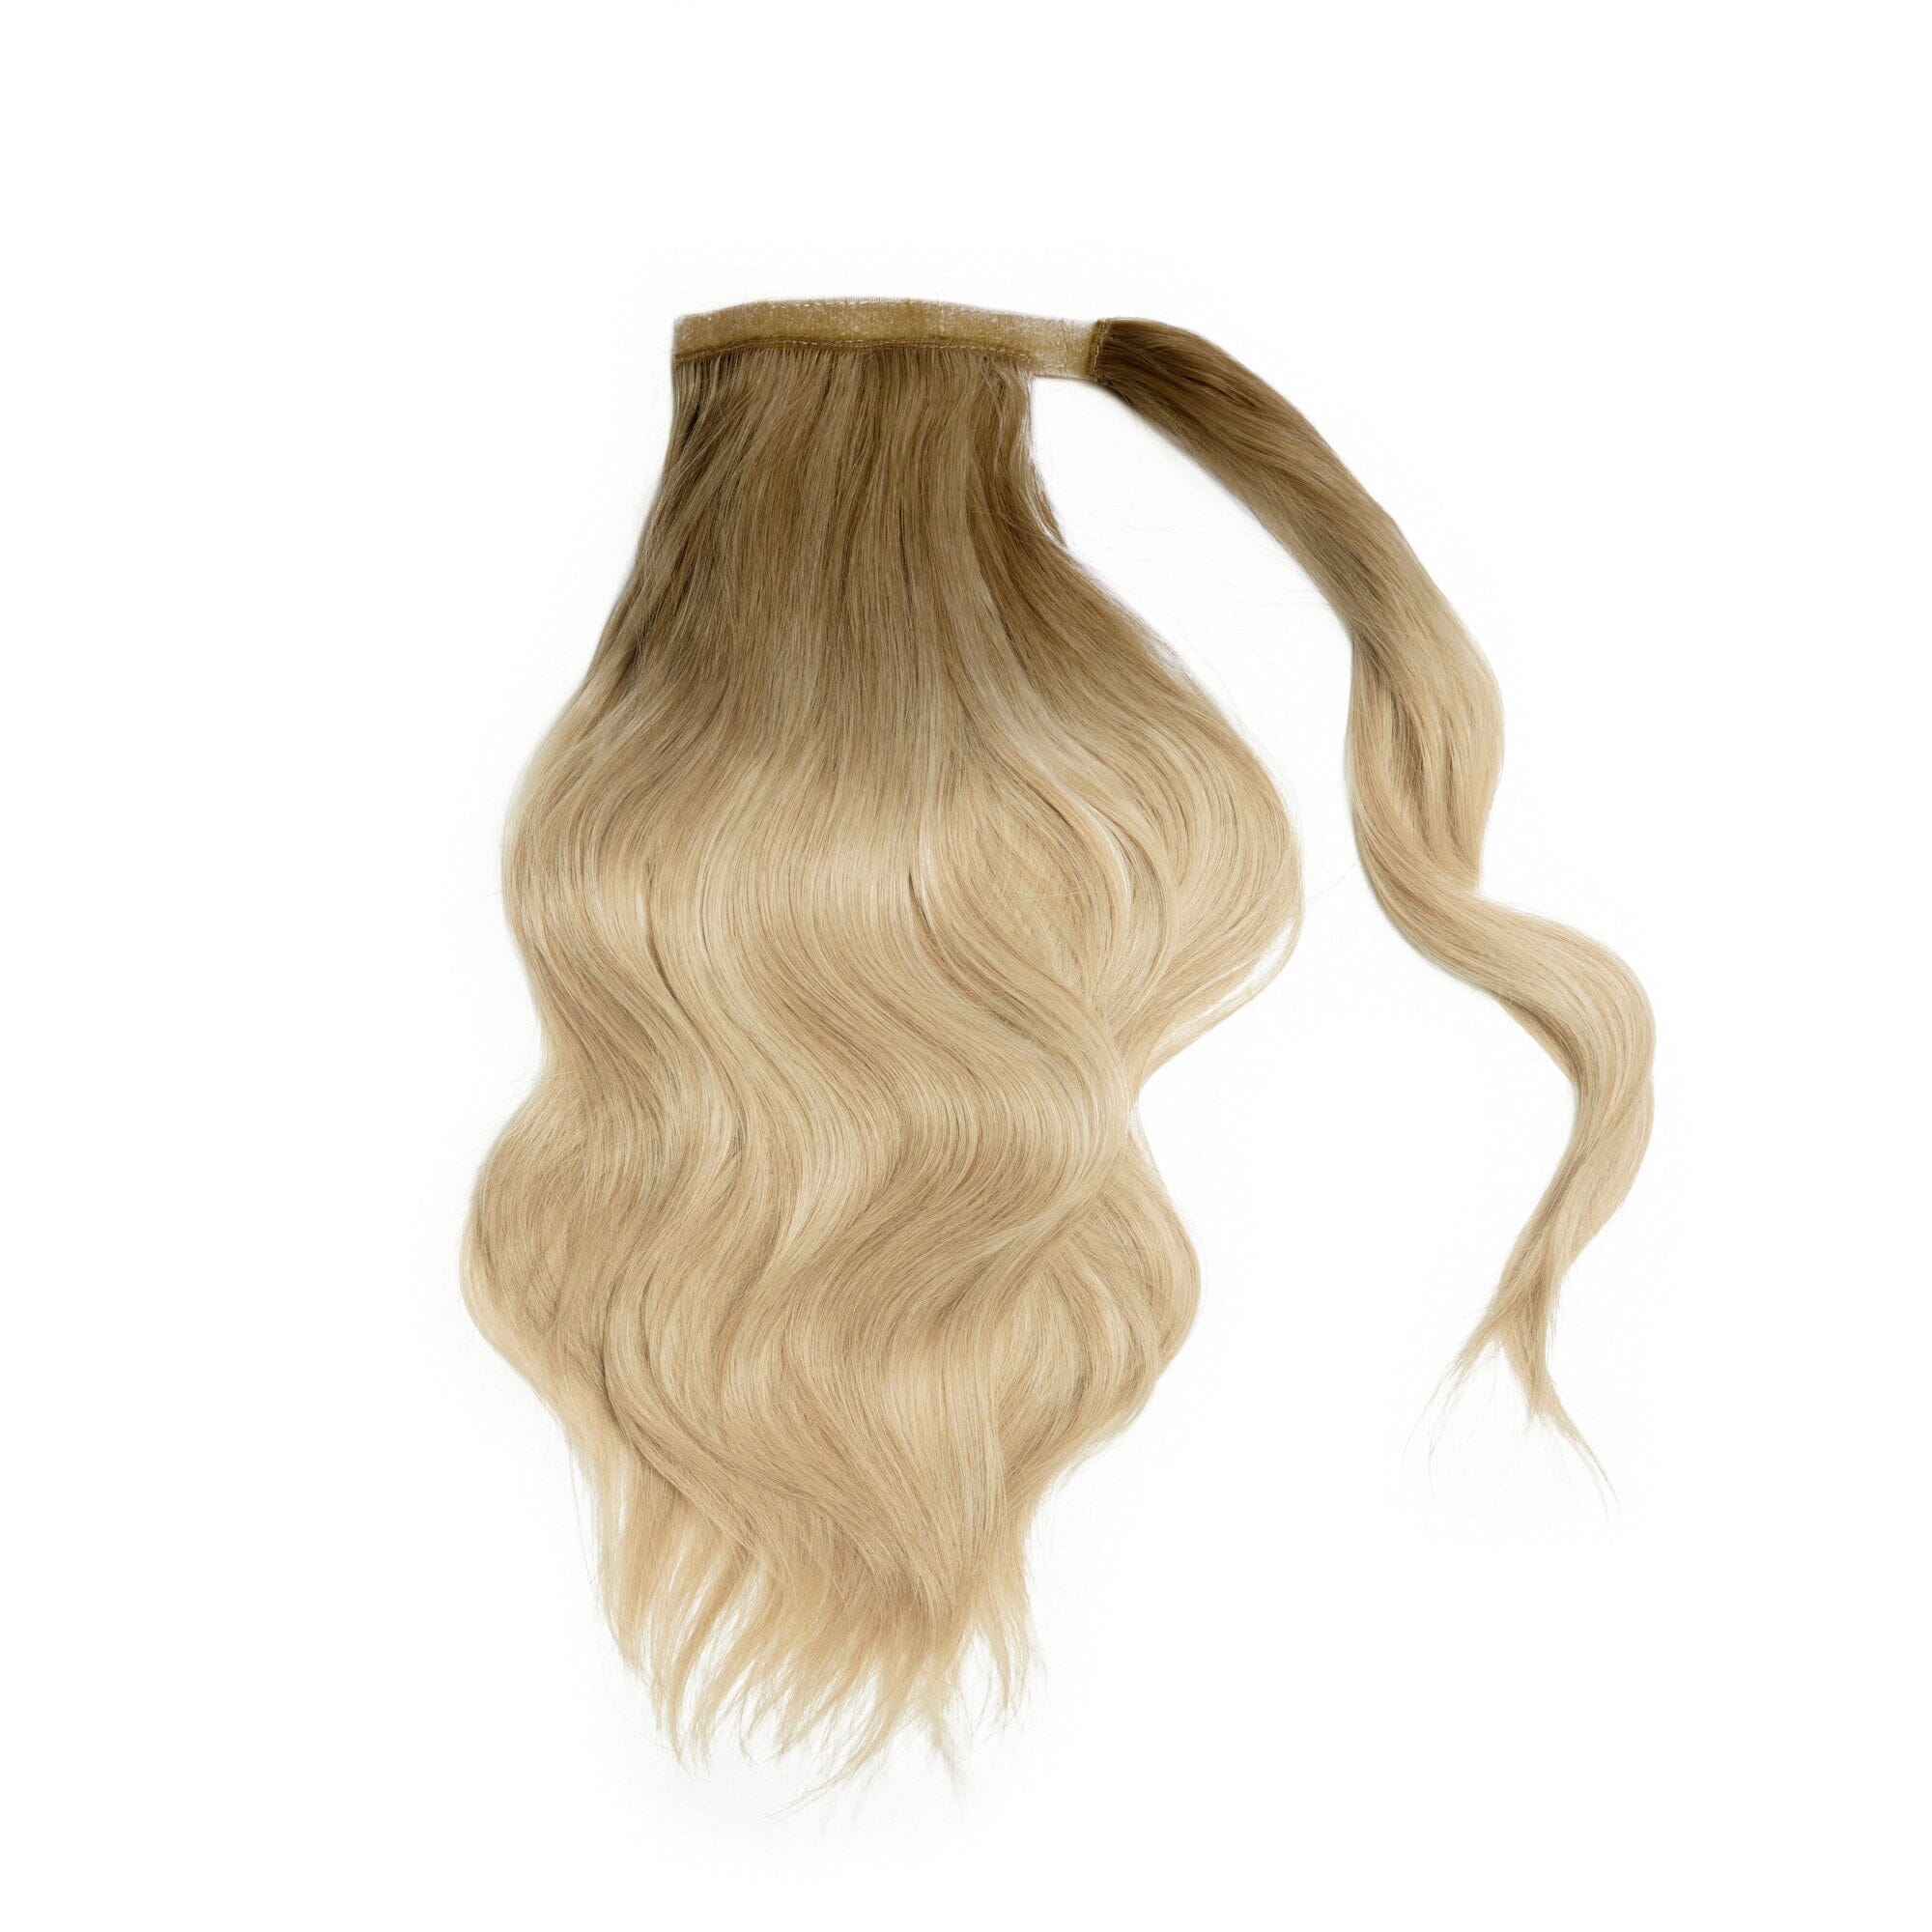 Short Clip-In Ponytails (12" - 20") Clip In Ponytail Easilocks 14" Wavy Clip-In Ponytail Rooted Blonde 